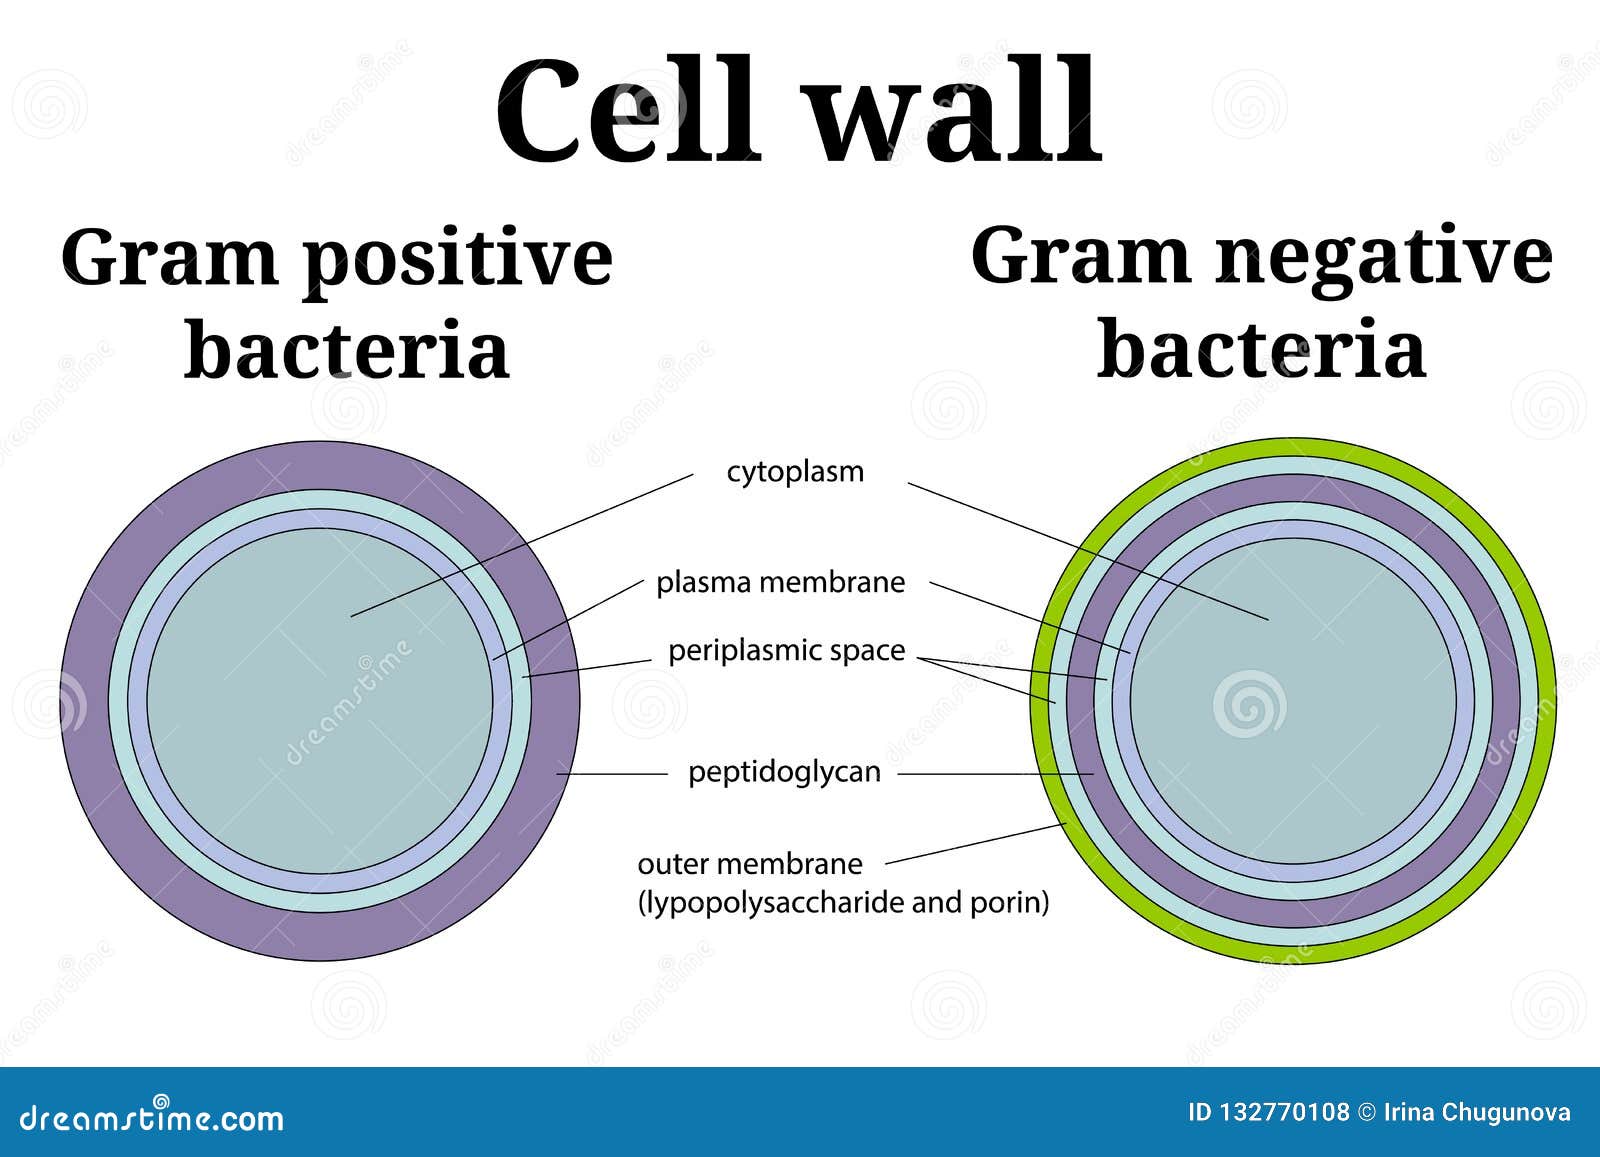 Bacteria Cell Wall Illustration. Gram Positive And Gram Negative Cell